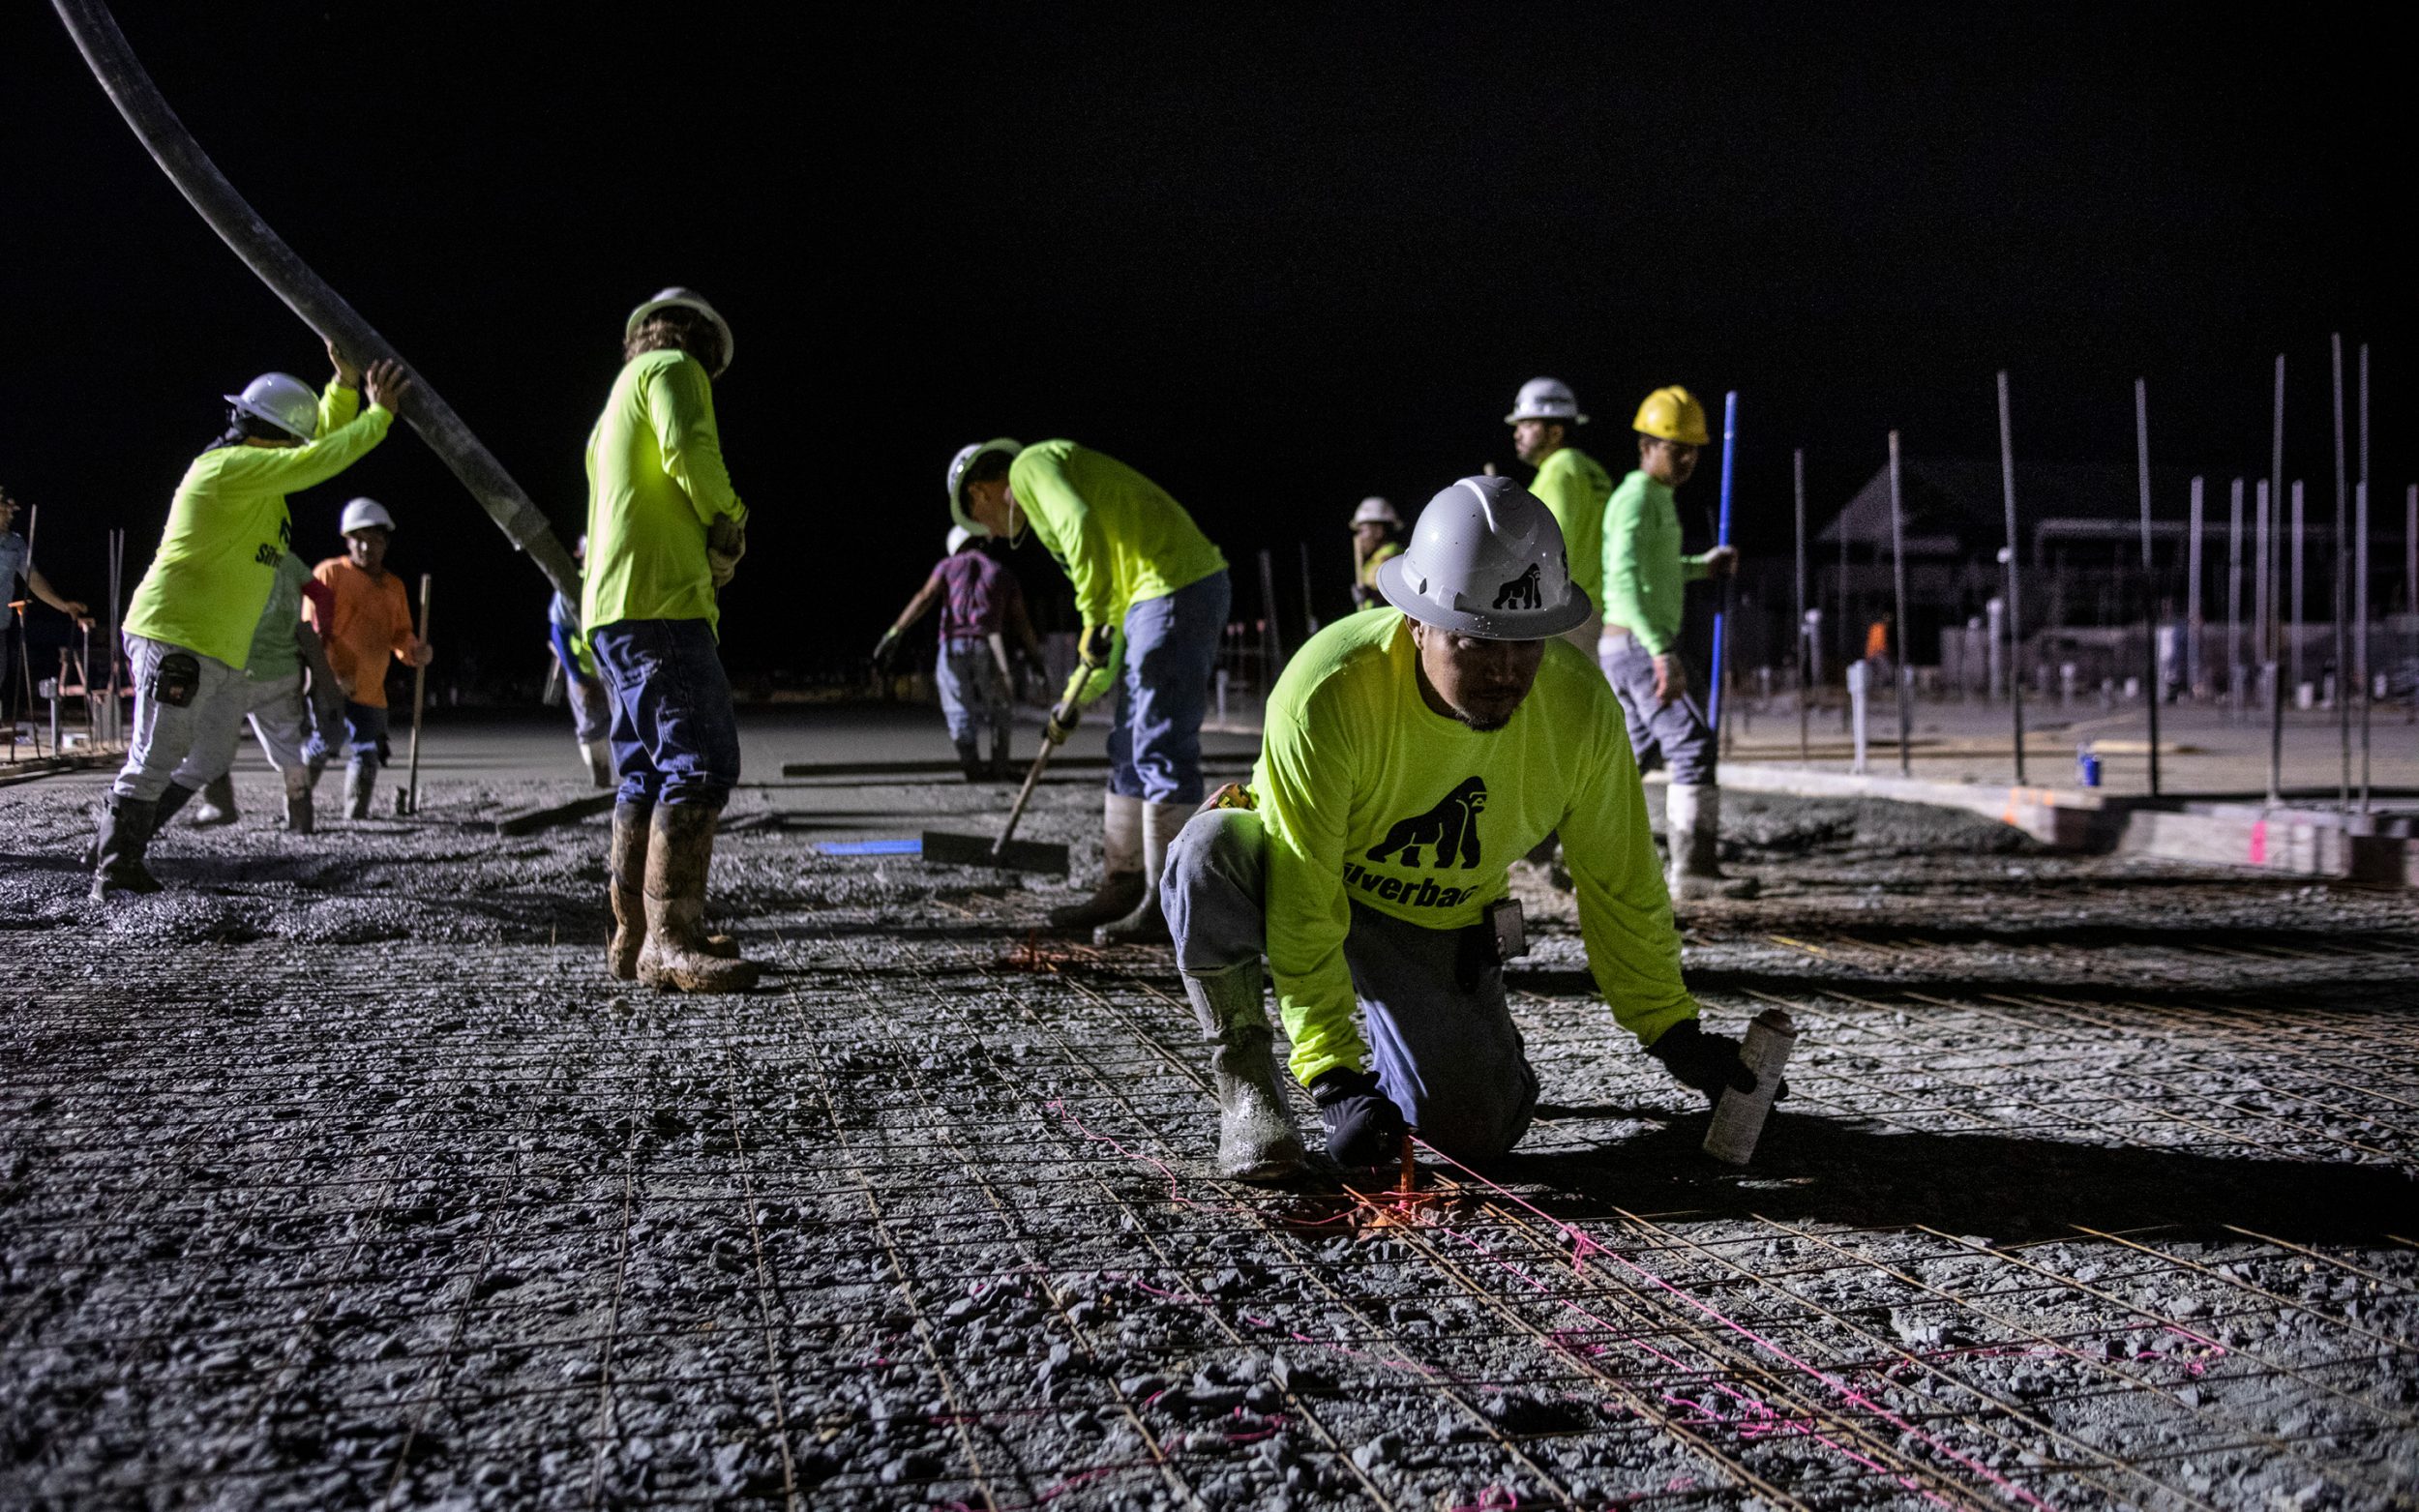 Construction site, workers at night under generator lights.